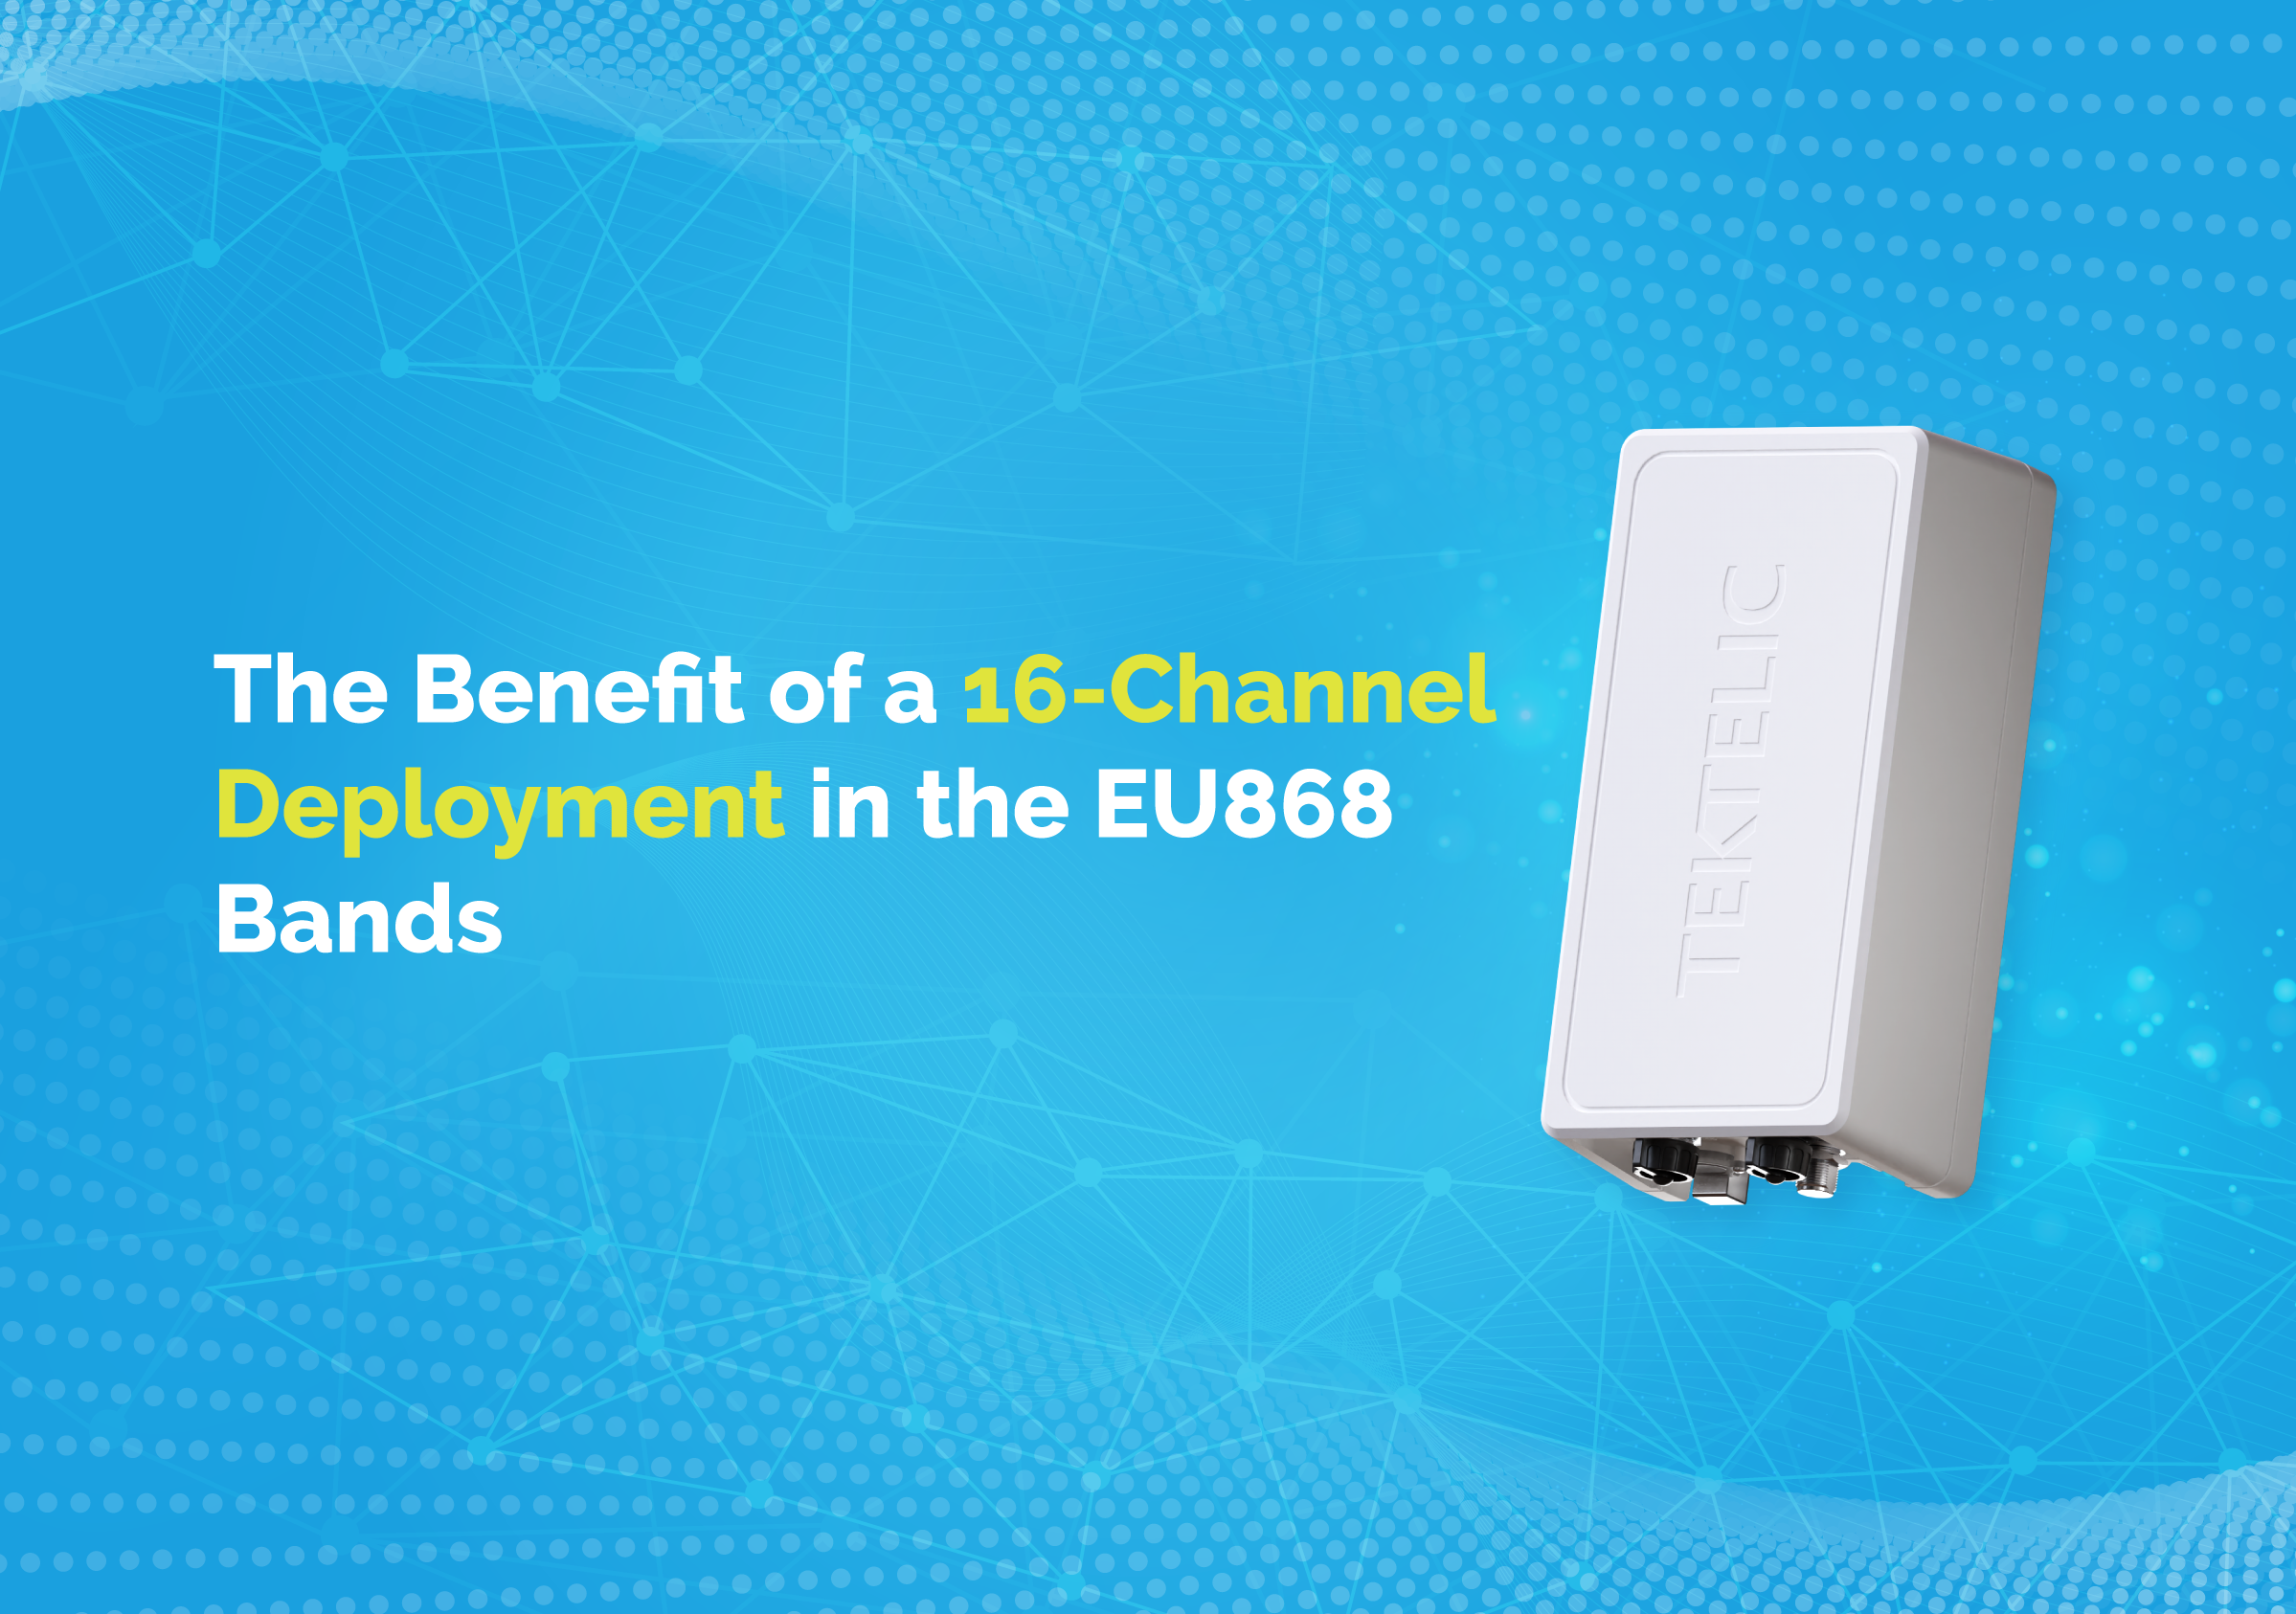 The benefit of a 16-channel deployment in the EU868 bands